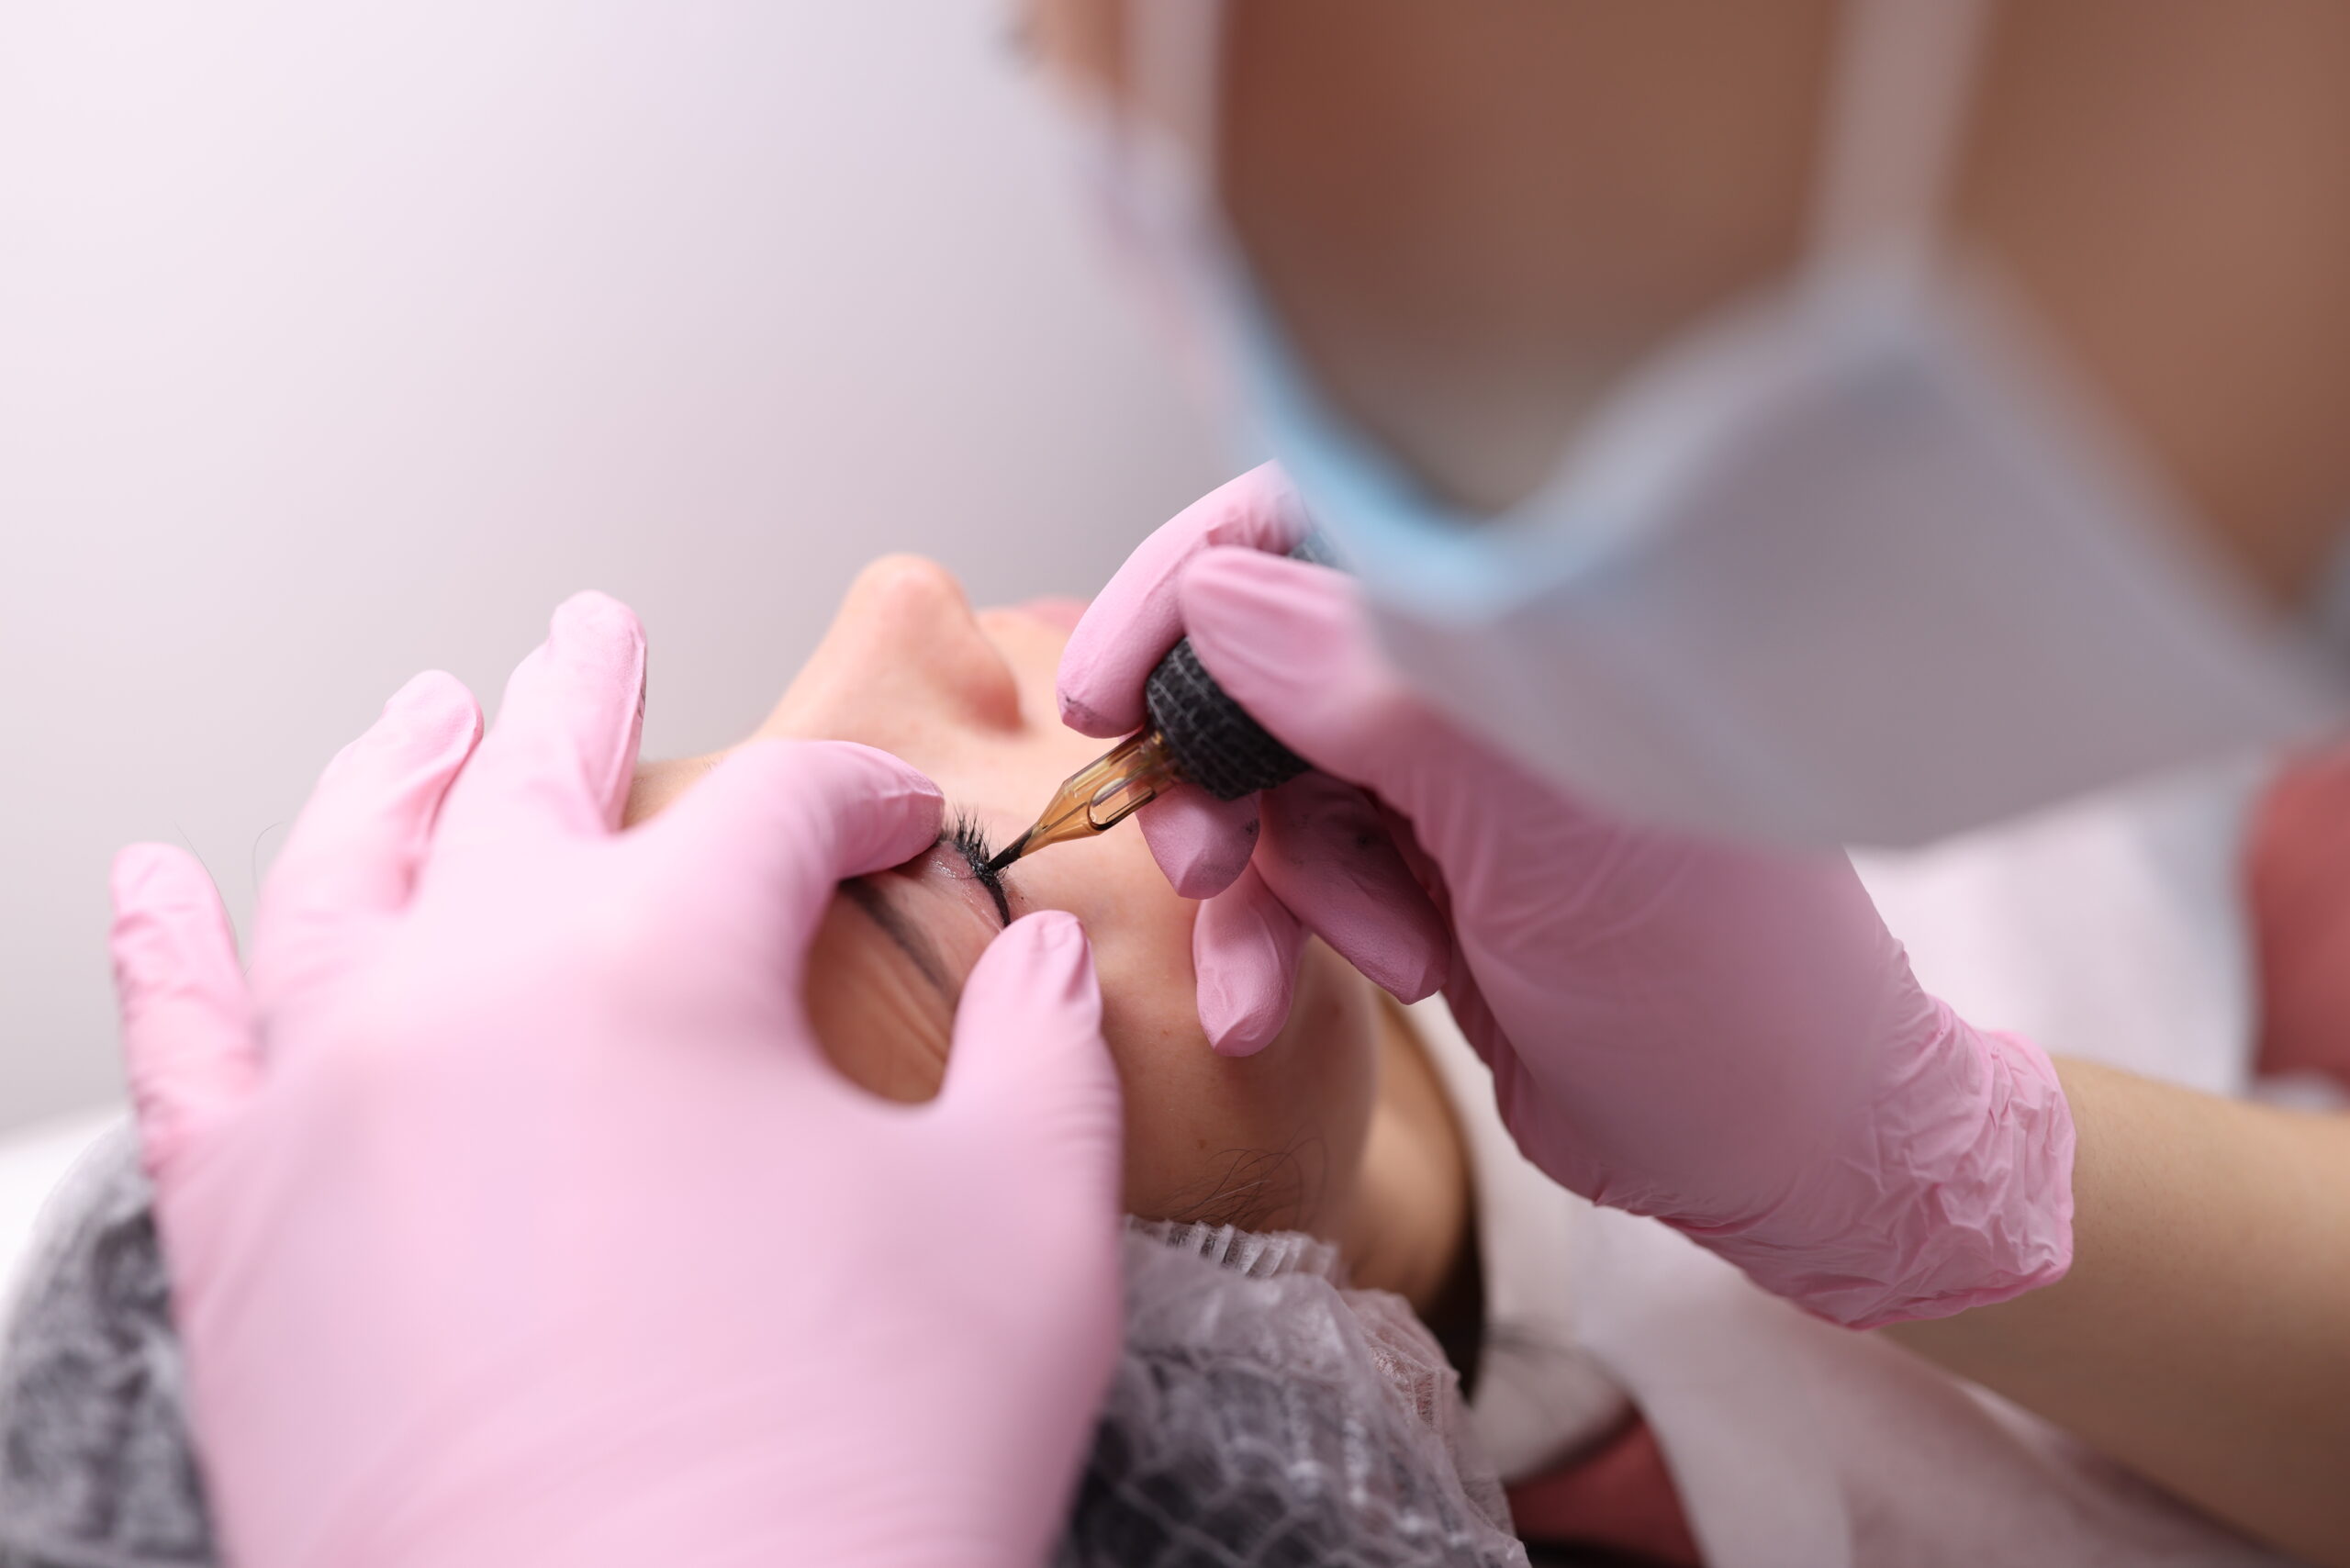 What is Medical Tattooing? | Skin Permanent Makeup | Blink beauty